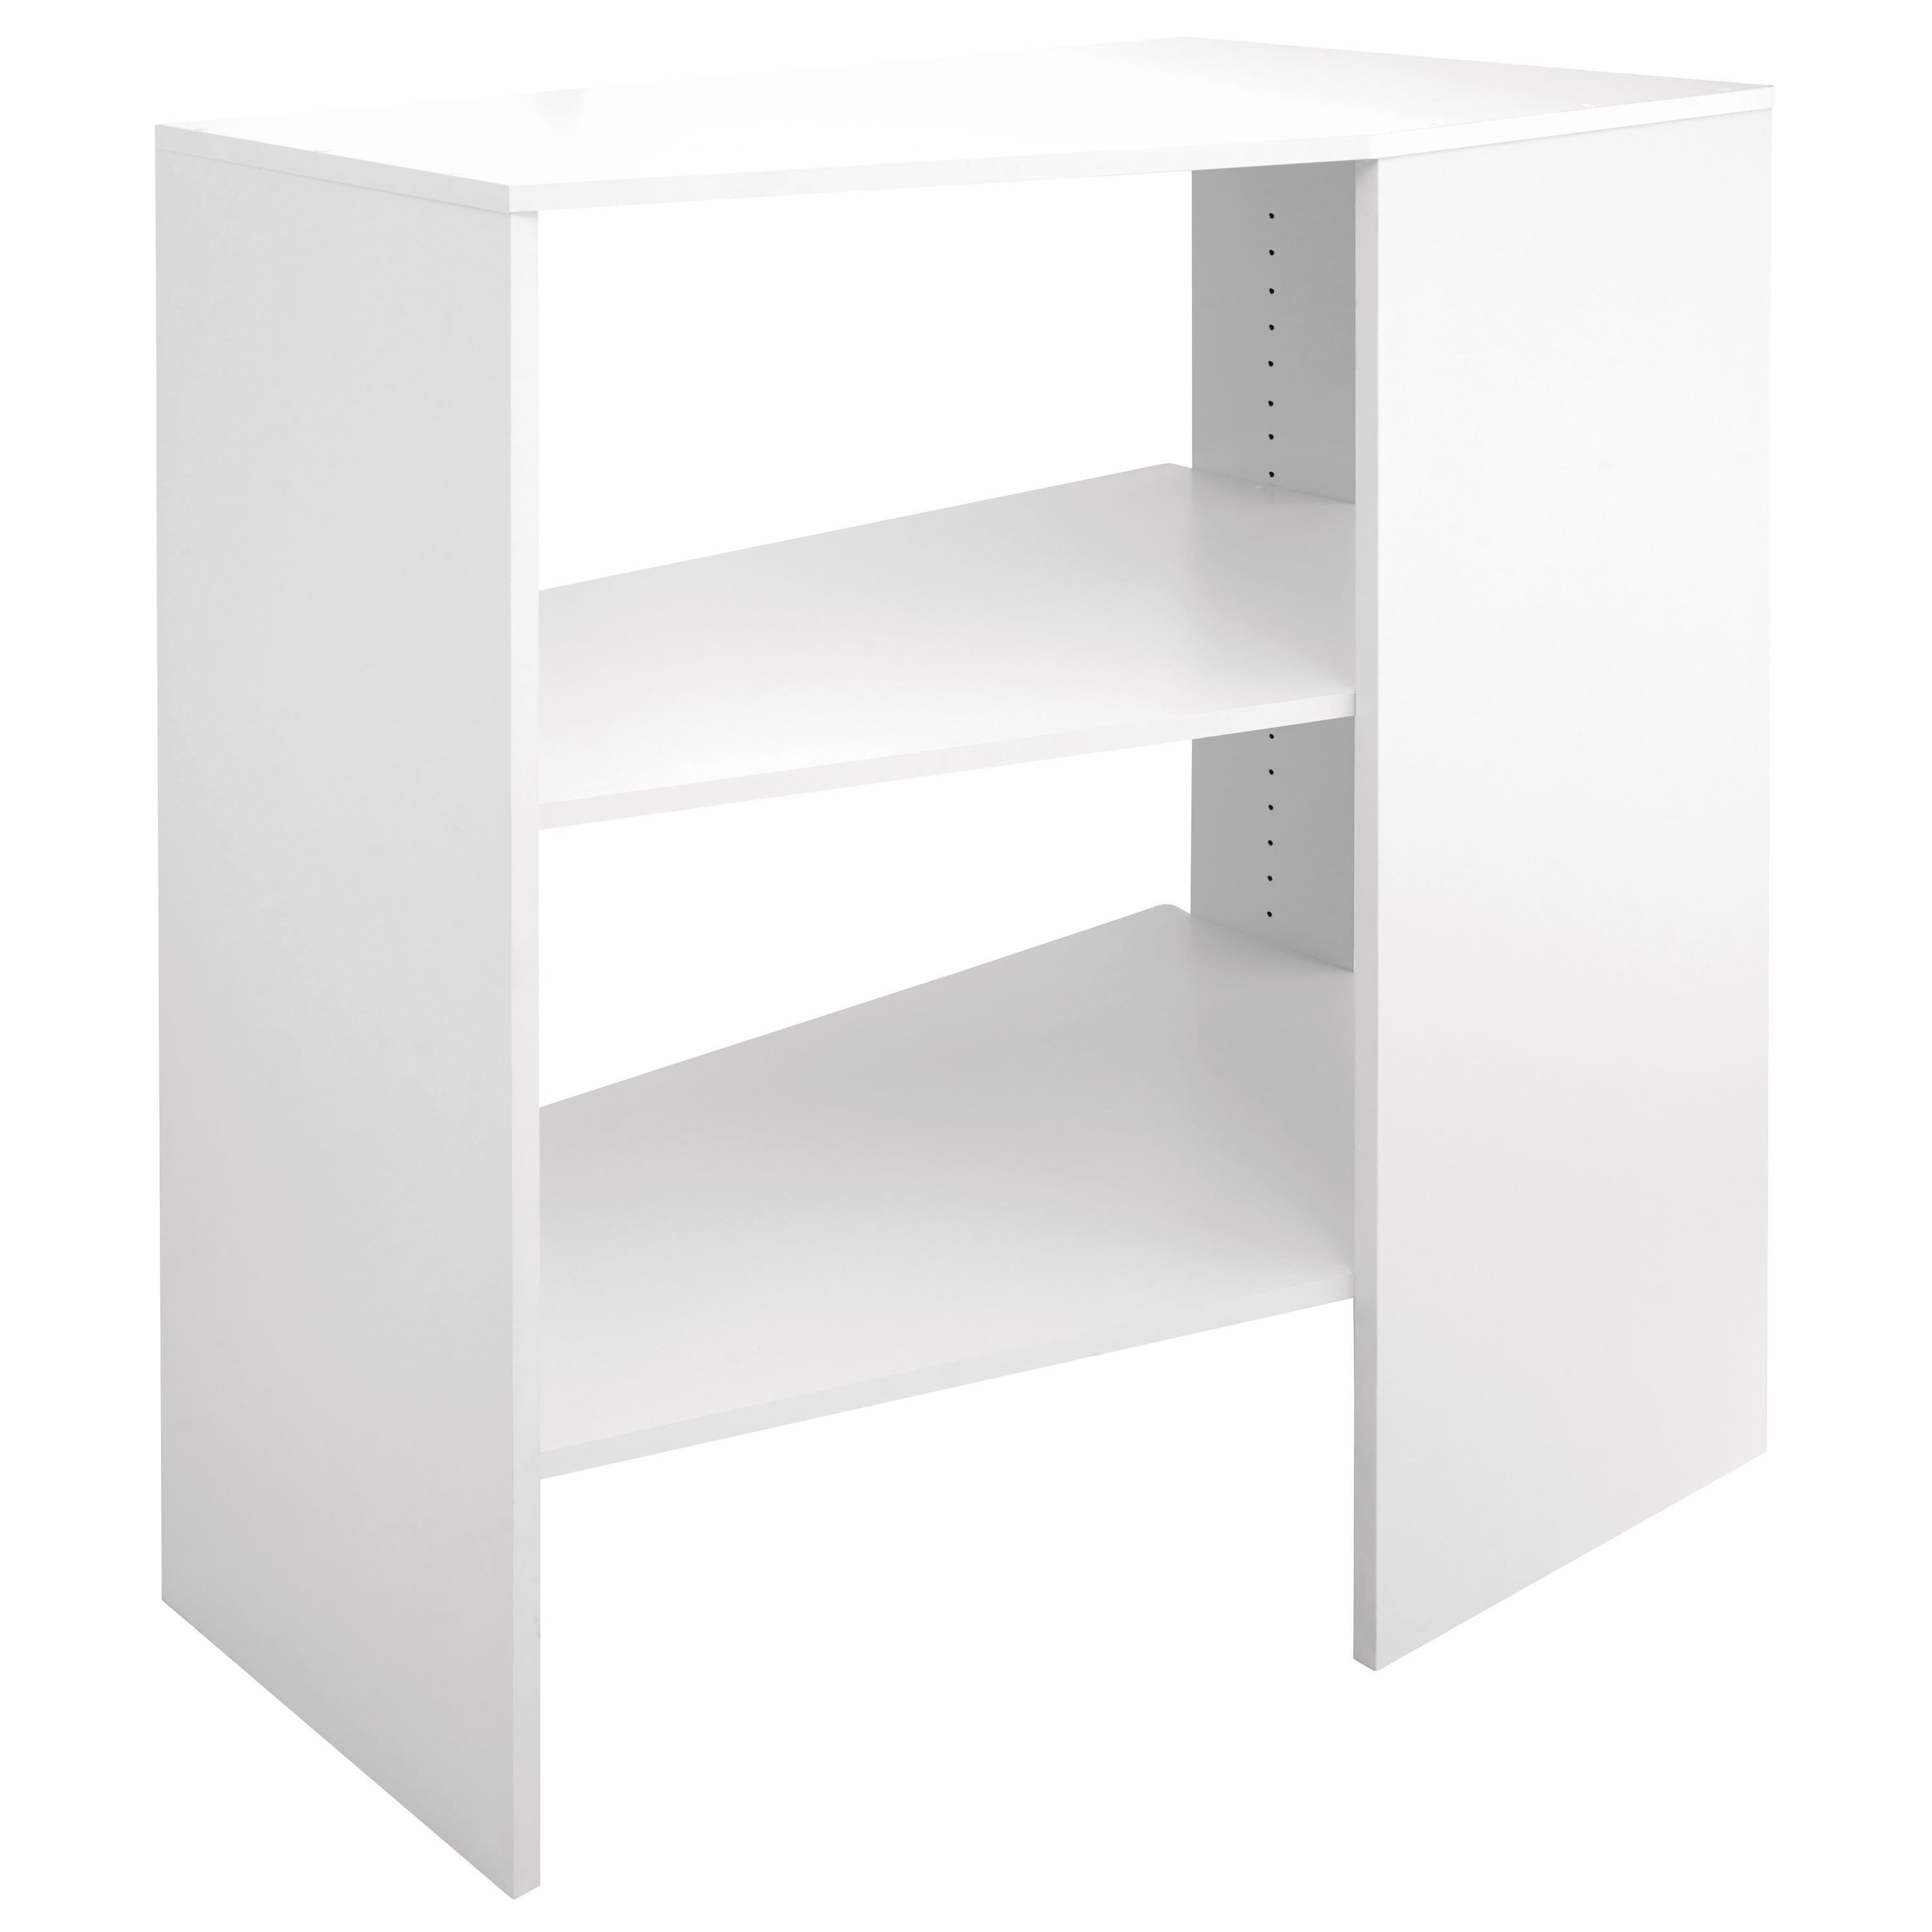 ClosetMaid BrightWood 31.75-in W x 19.67-in D White Solid Shelving